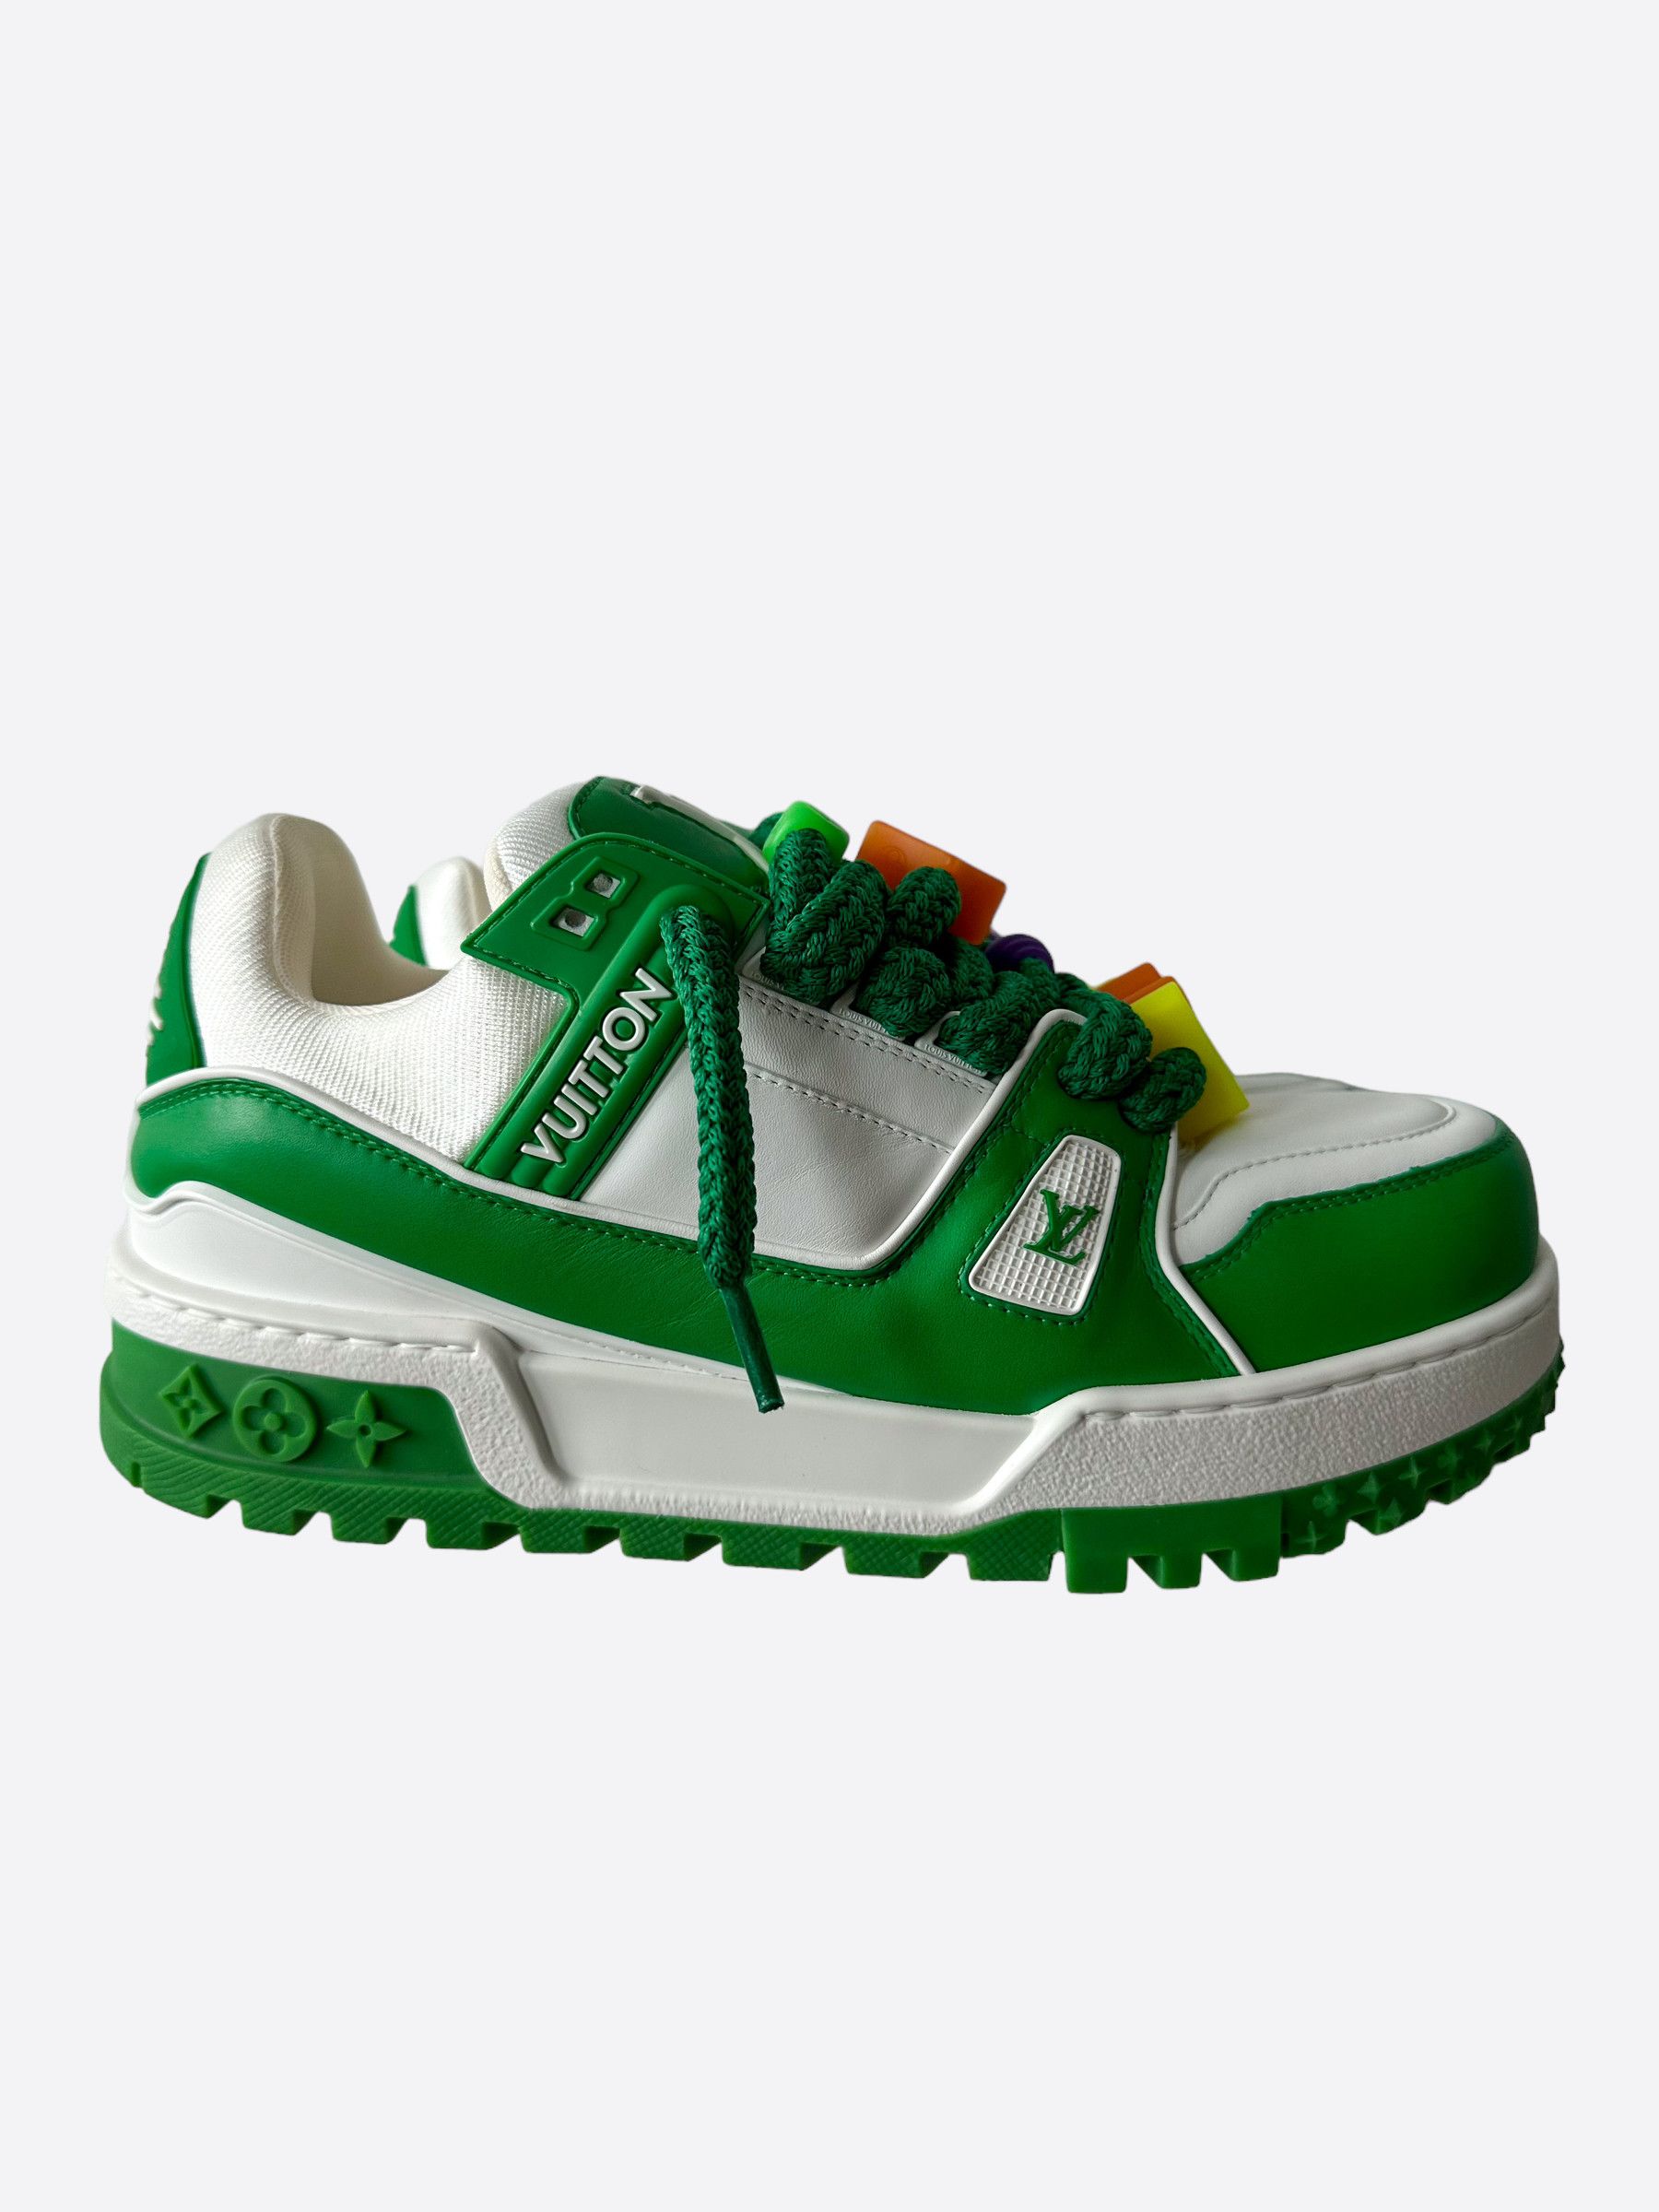 Louis Vuitton 'LV Trainer- Patent Green' Sneakers - Green Sneakers